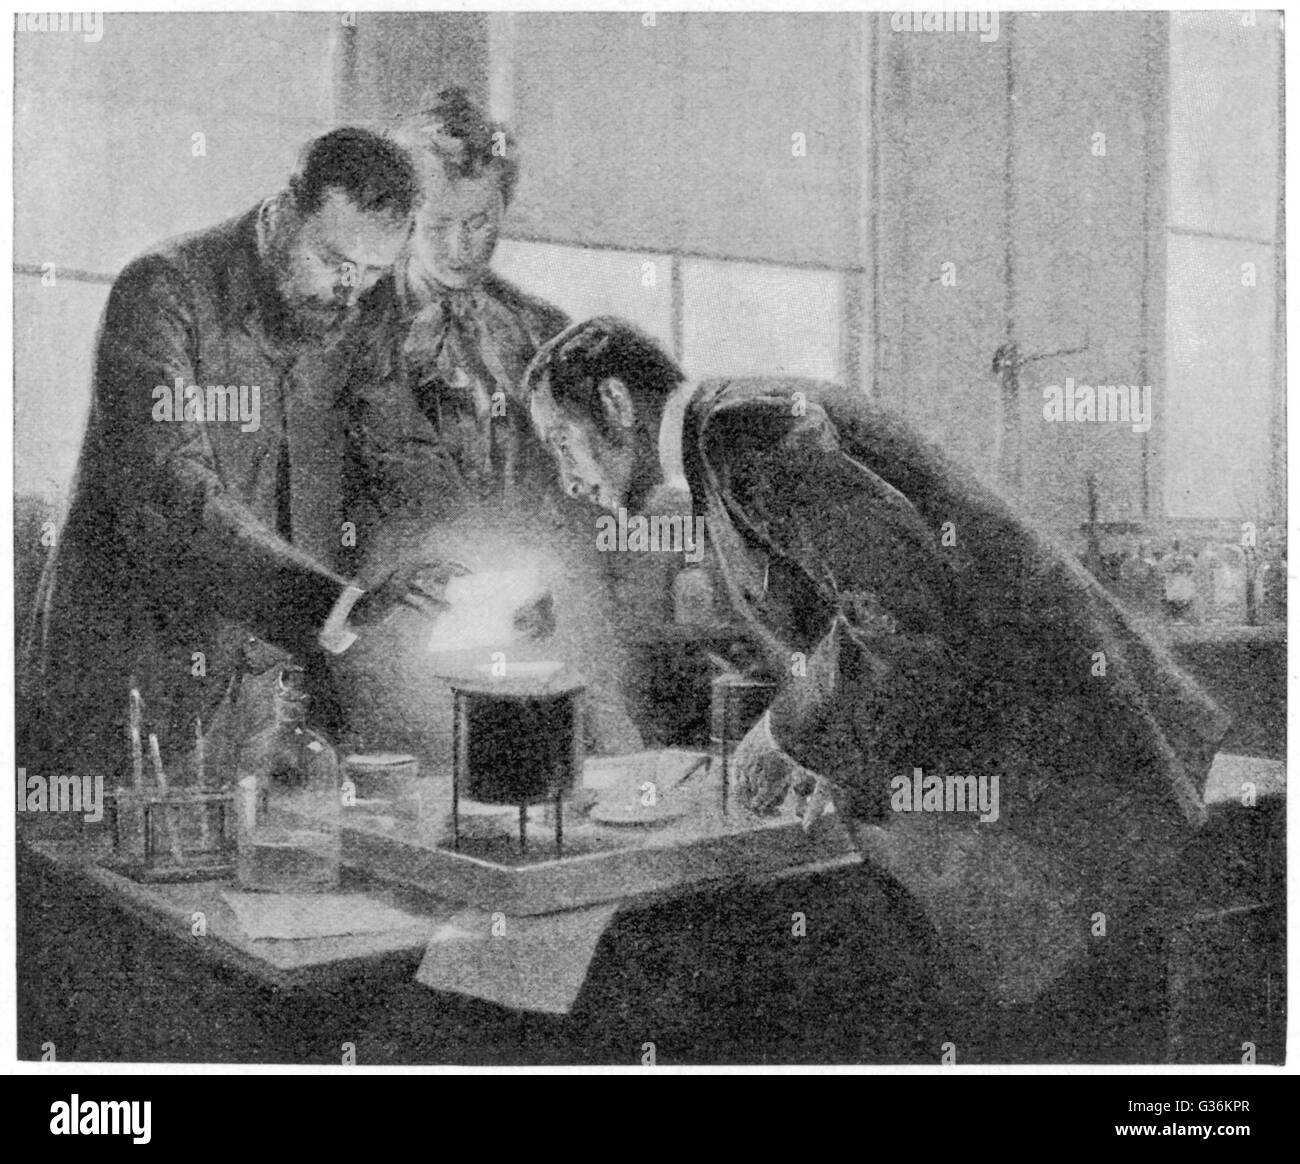 Marie and Pierre Curie in their laboratory, Paris Stock Photo